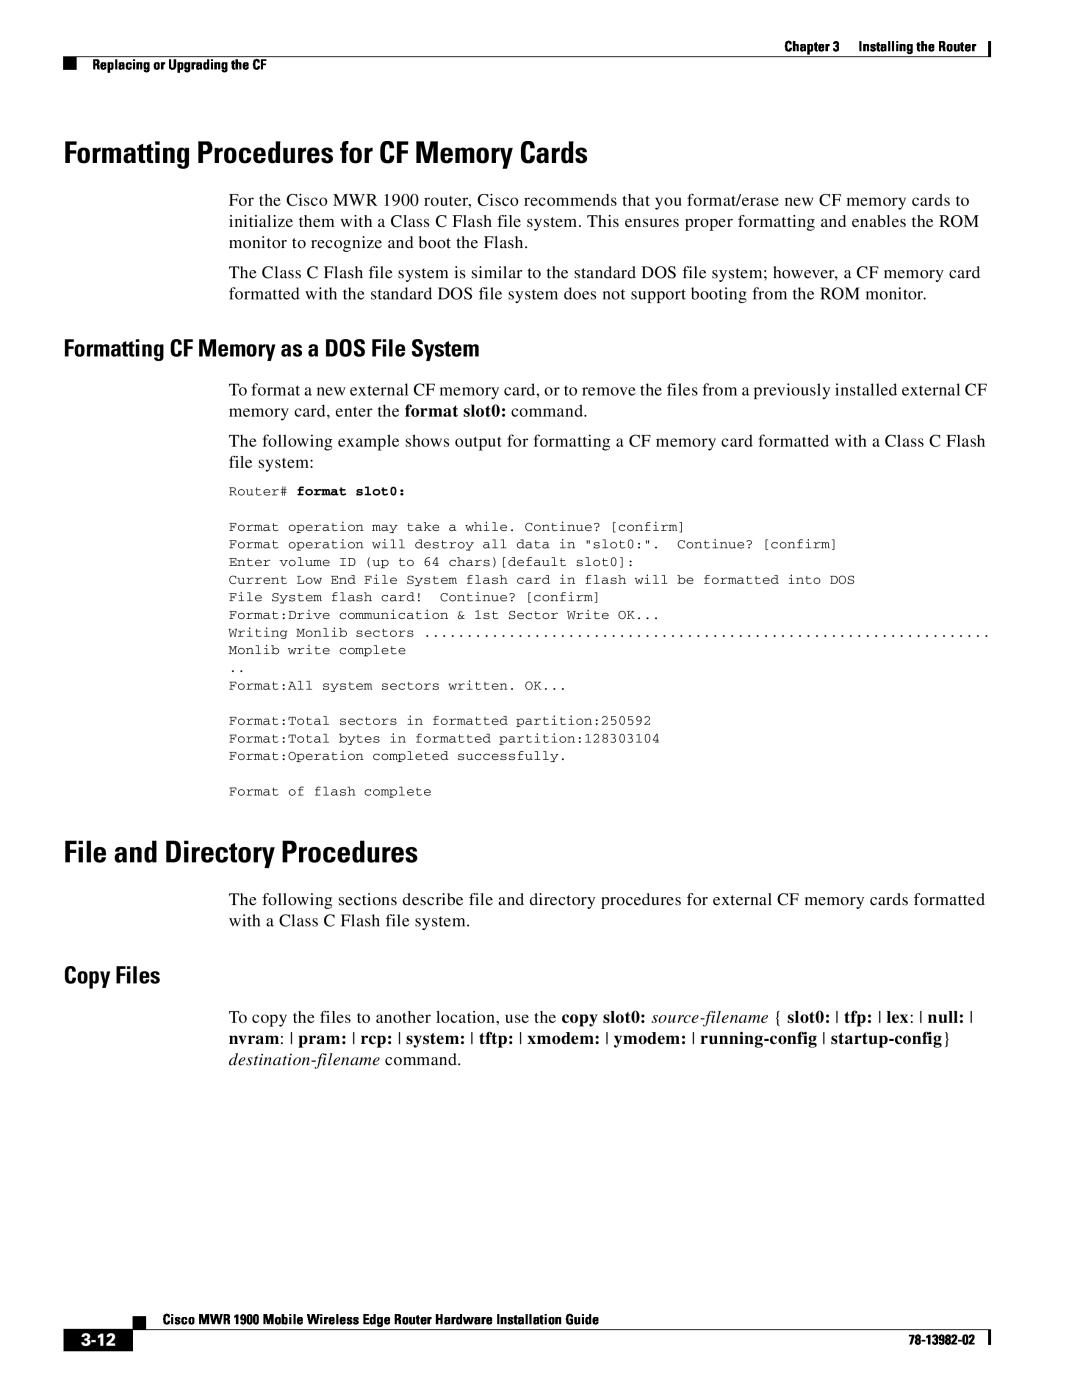 Cisco Systems MWR 1900 manual Formatting Procedures for CF Memory Cards, File and Directory Procedures, Copy Files, 3-12 